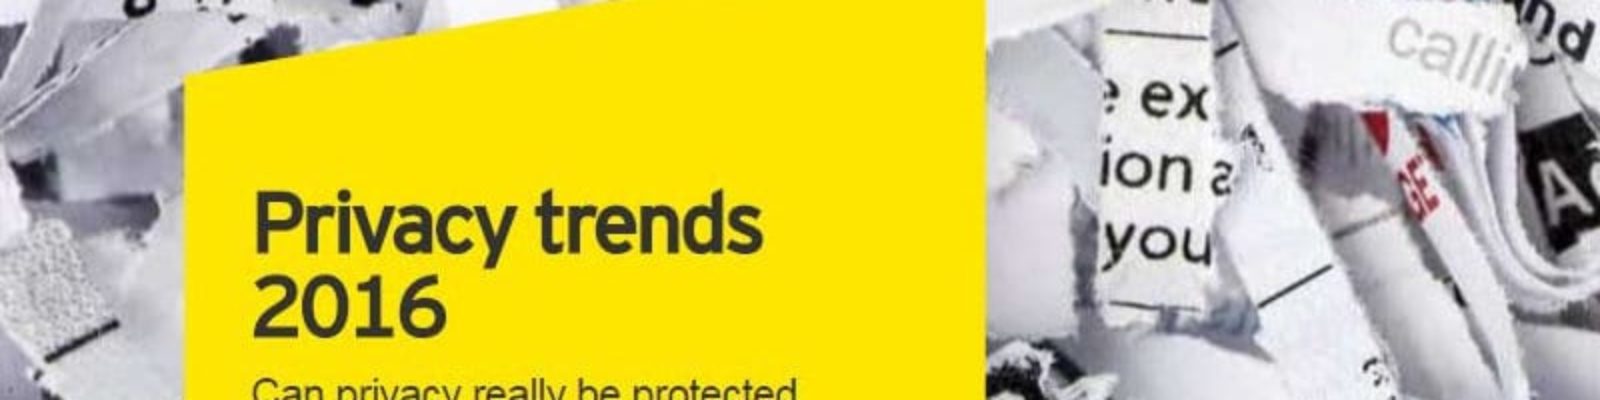 EY Privacy trends 2016